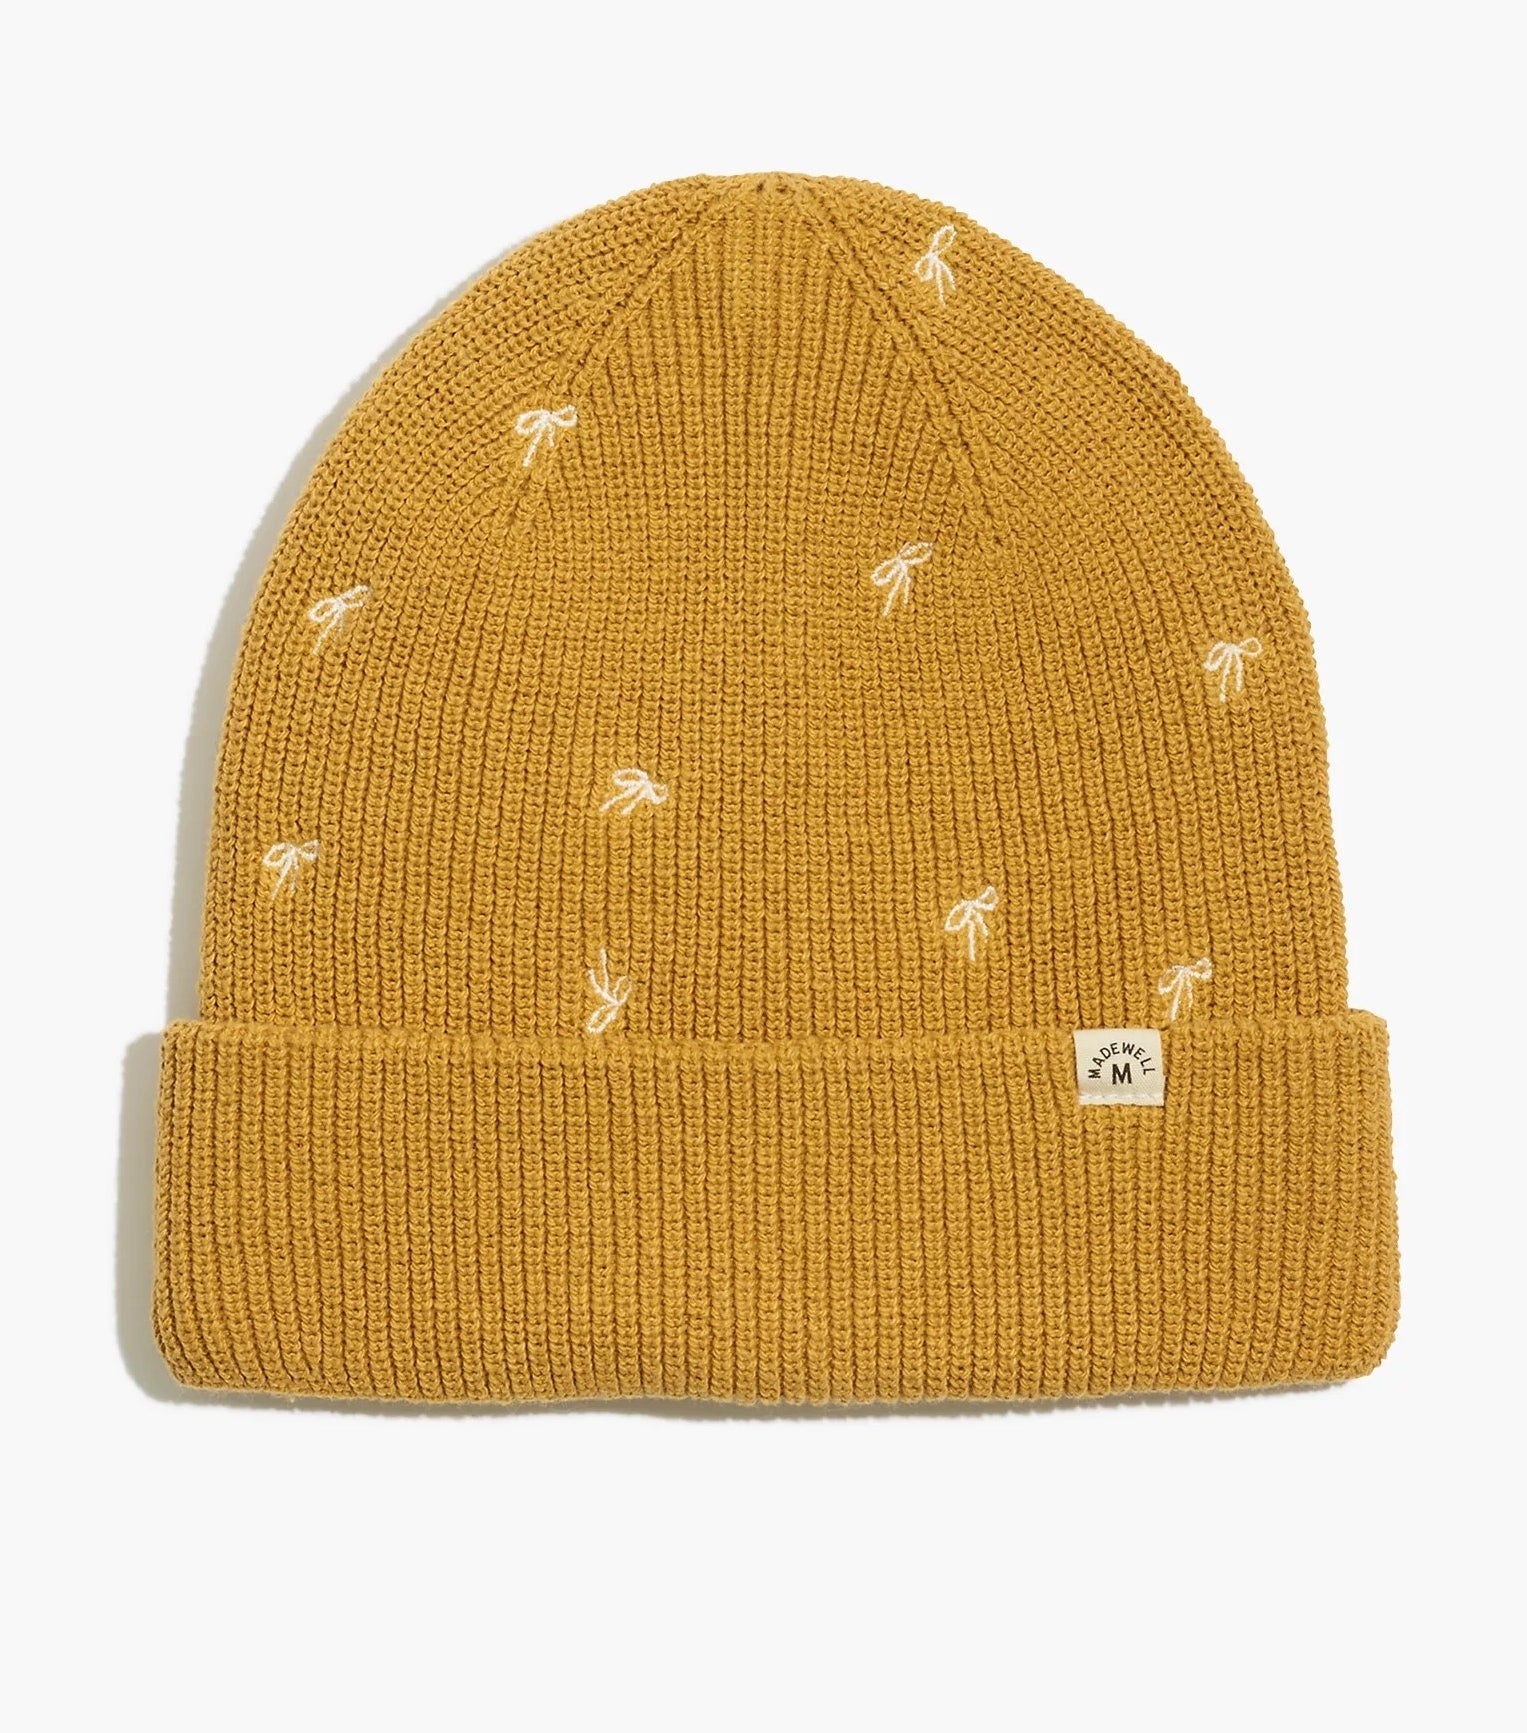 The yellow bow embroidered beanie